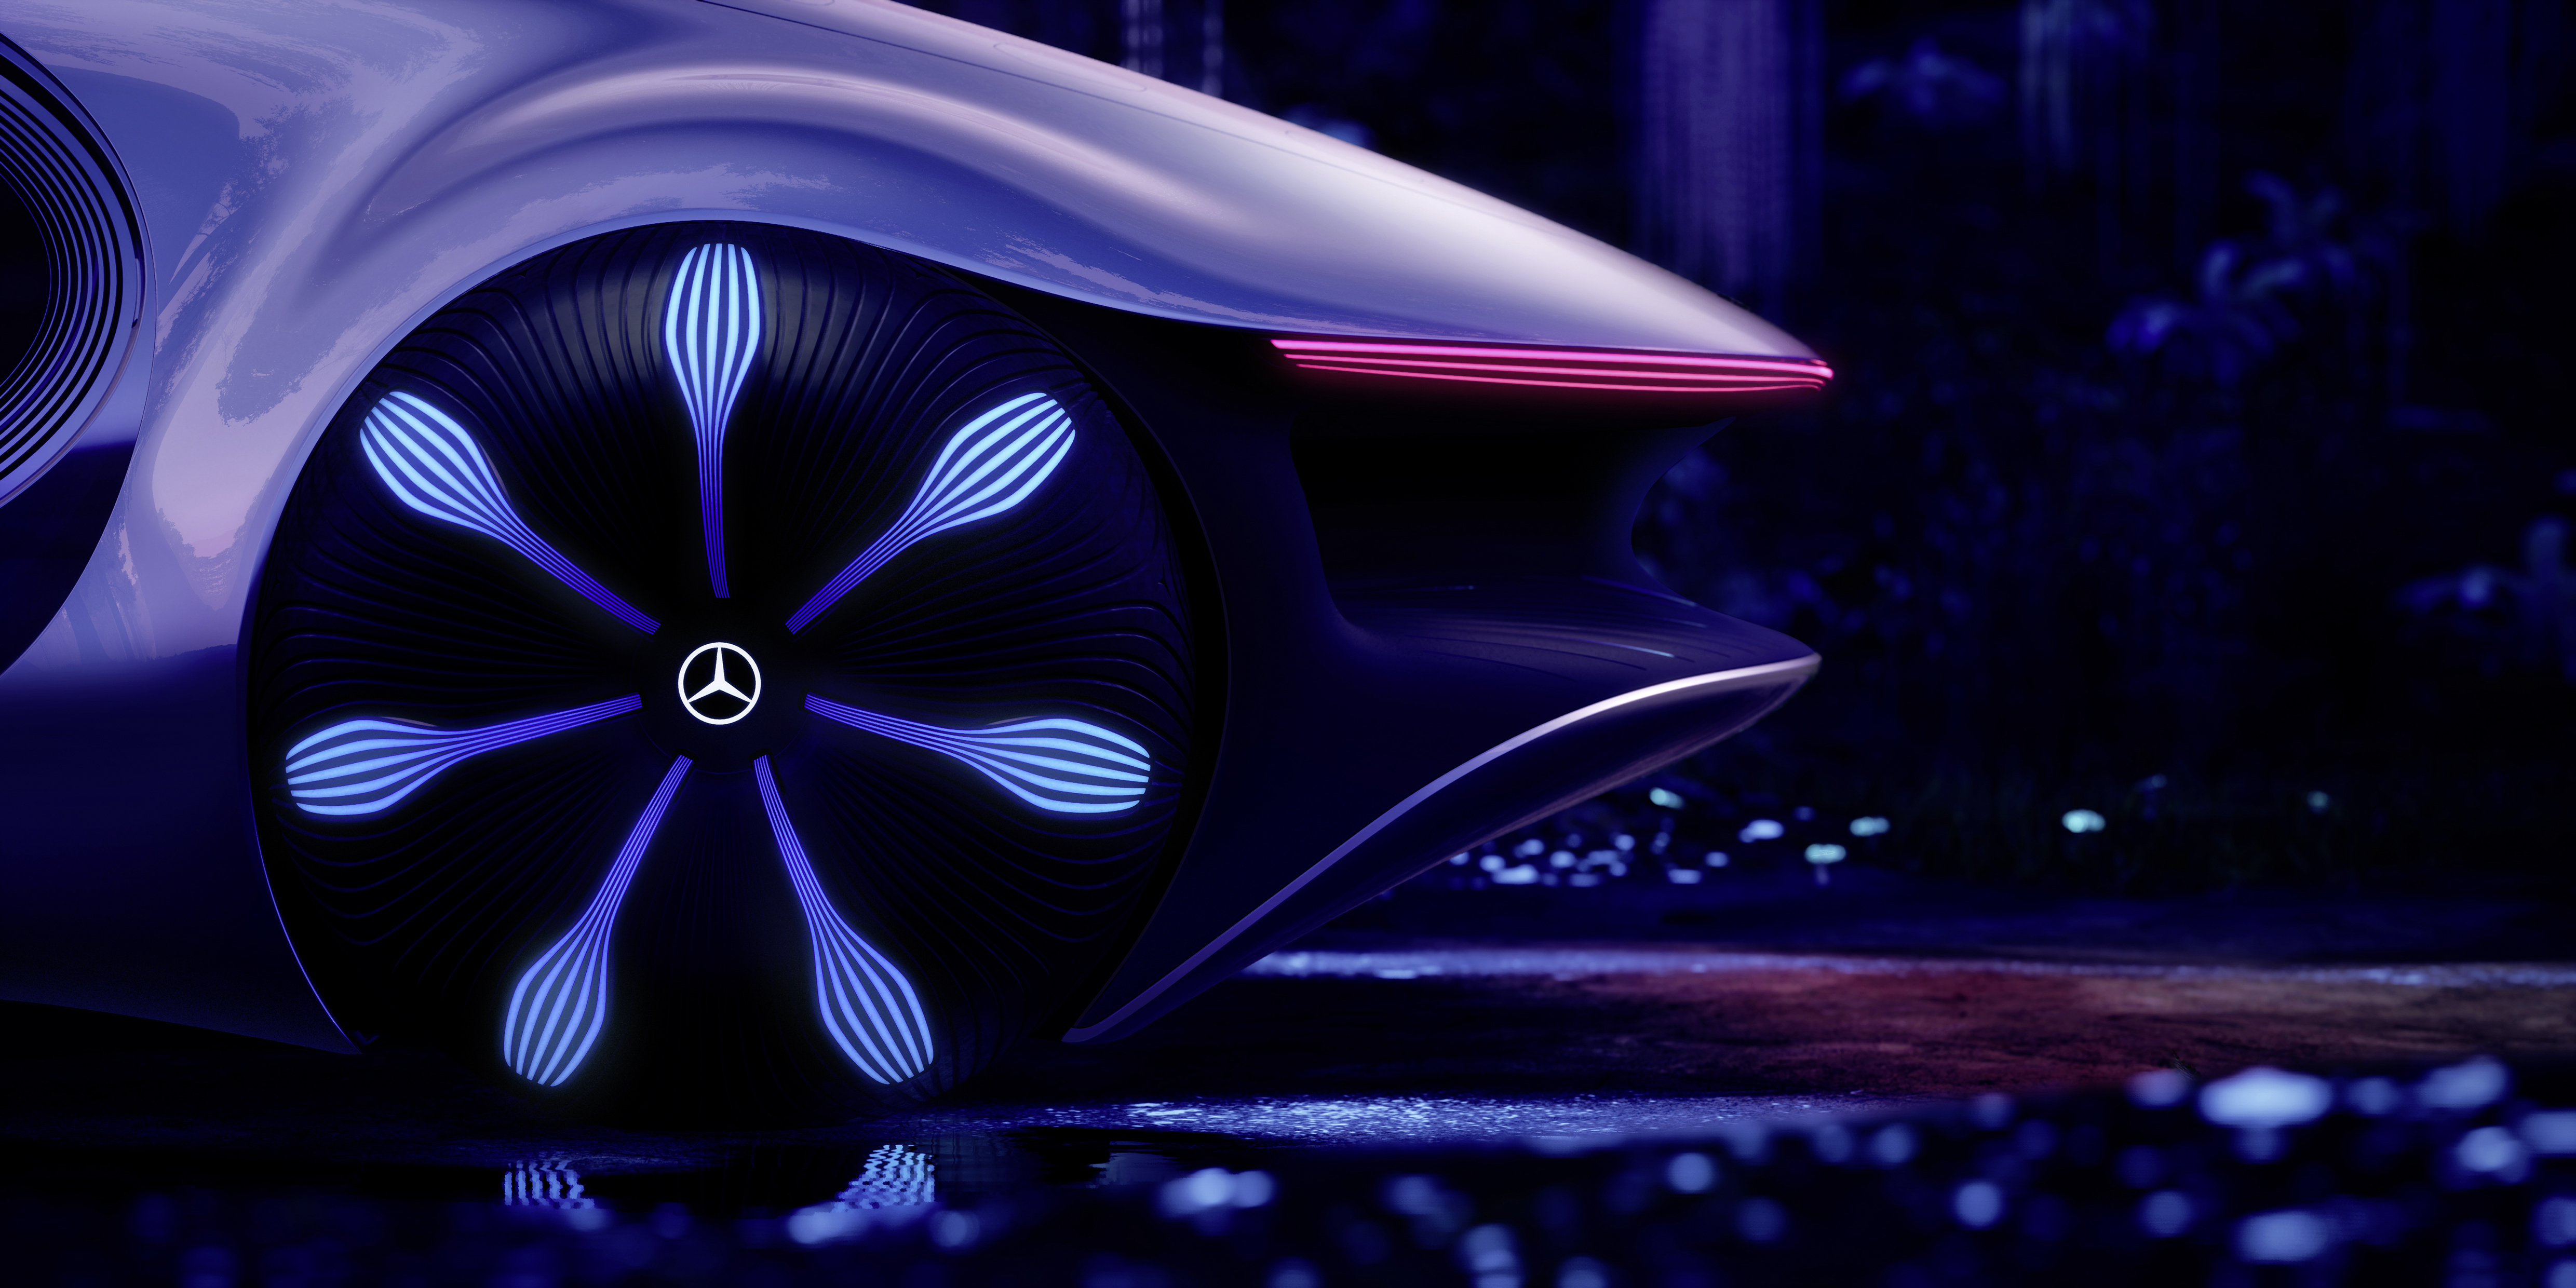 The Mercedes-Benz has a taut "one-bow" lines and organic design.